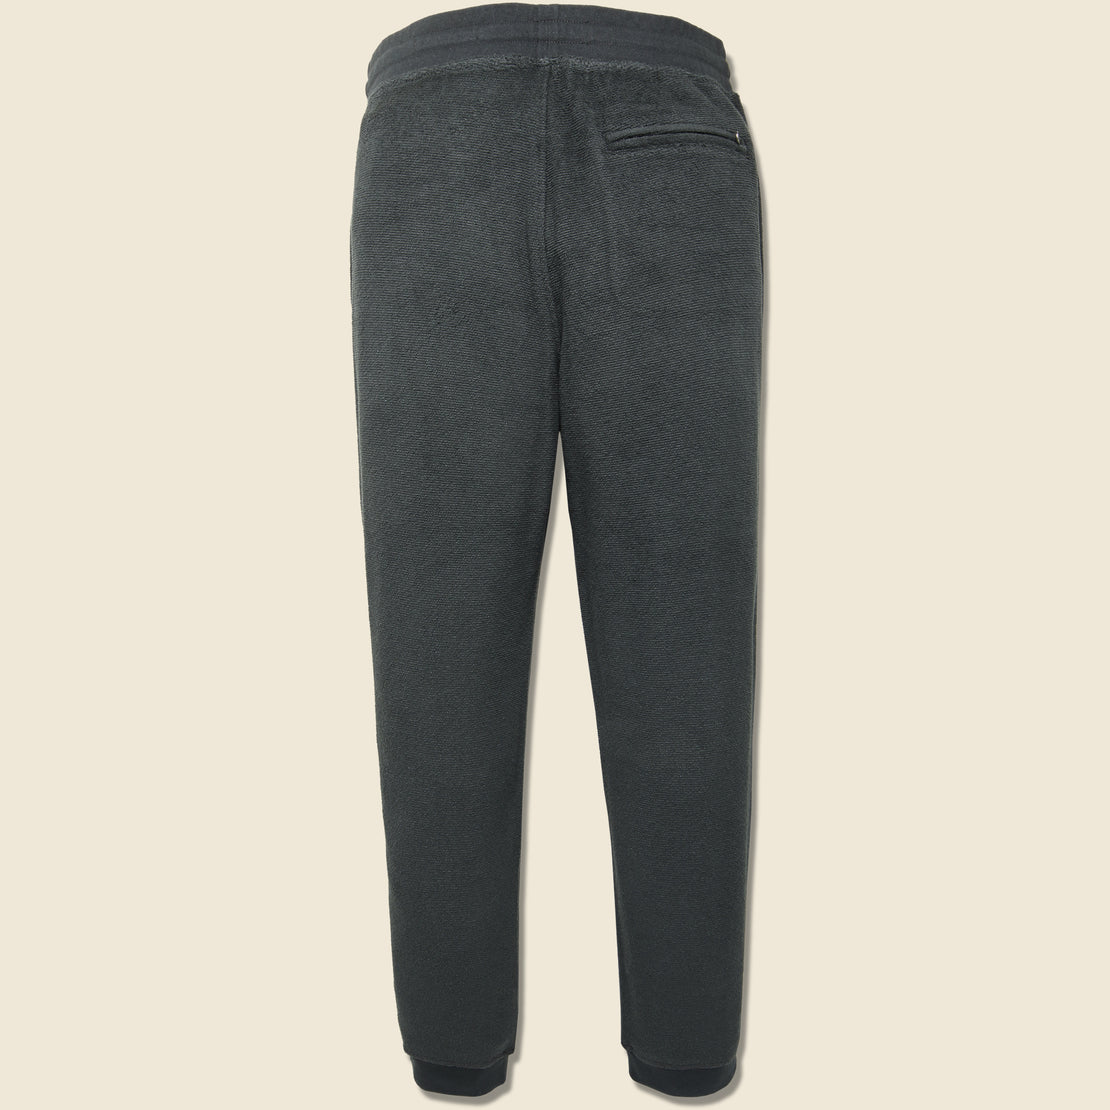 Hightide Sweatpant - Pitch Black - Outerknown - STAG Provisions - Pants - Lounge